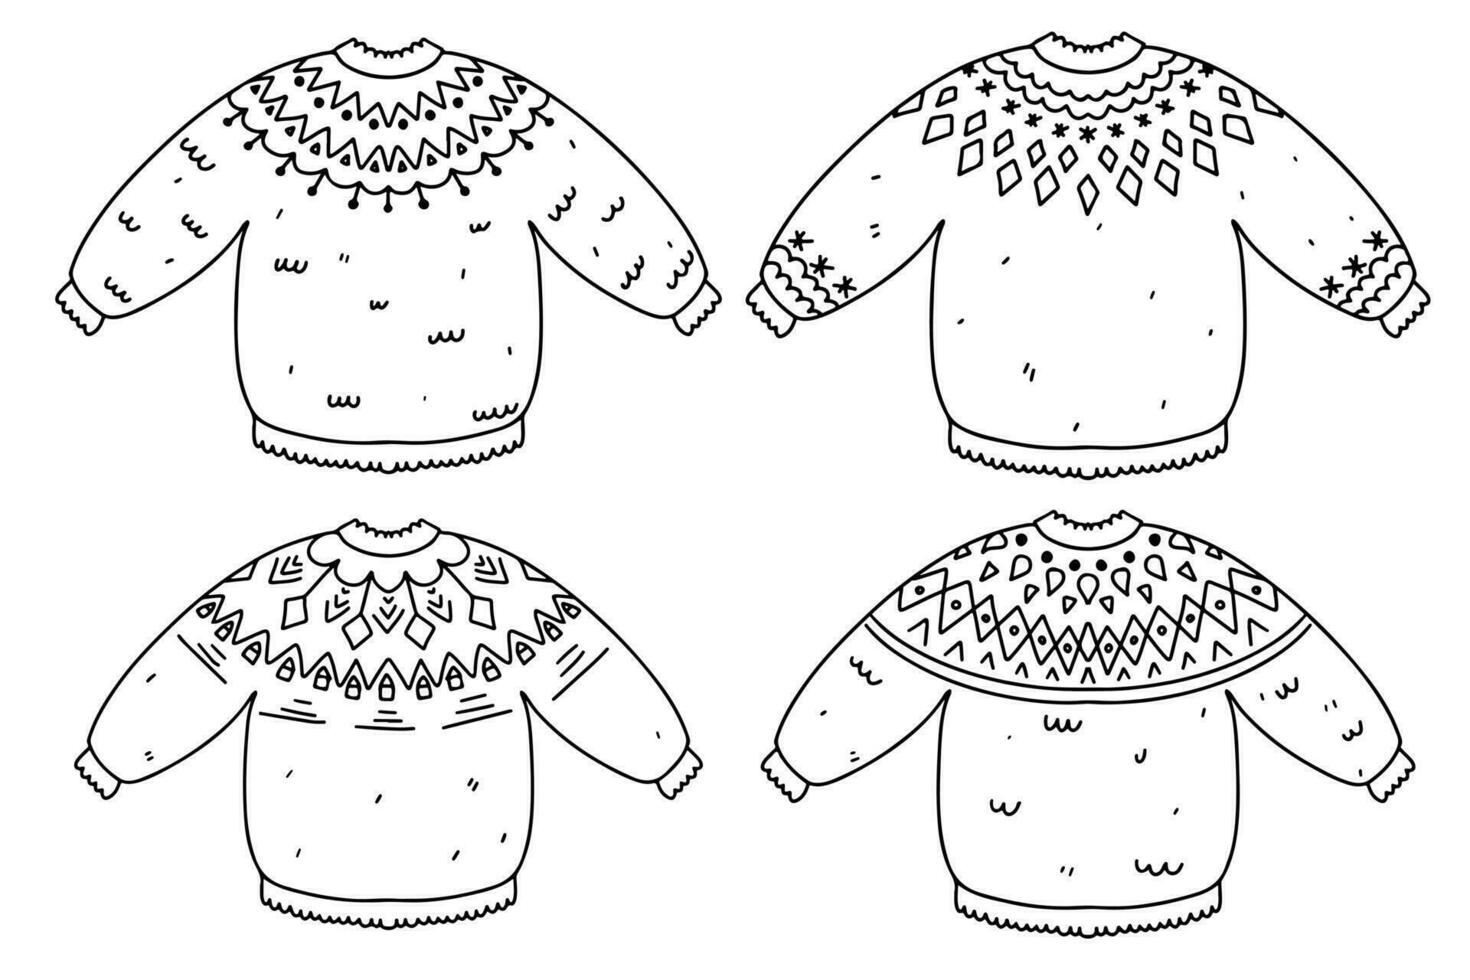 Ugly Christmas sweaters. Lopapeysa knitted jumpers. Hand drawn doodle style. Vector illustration isolated on white. Coloring page.